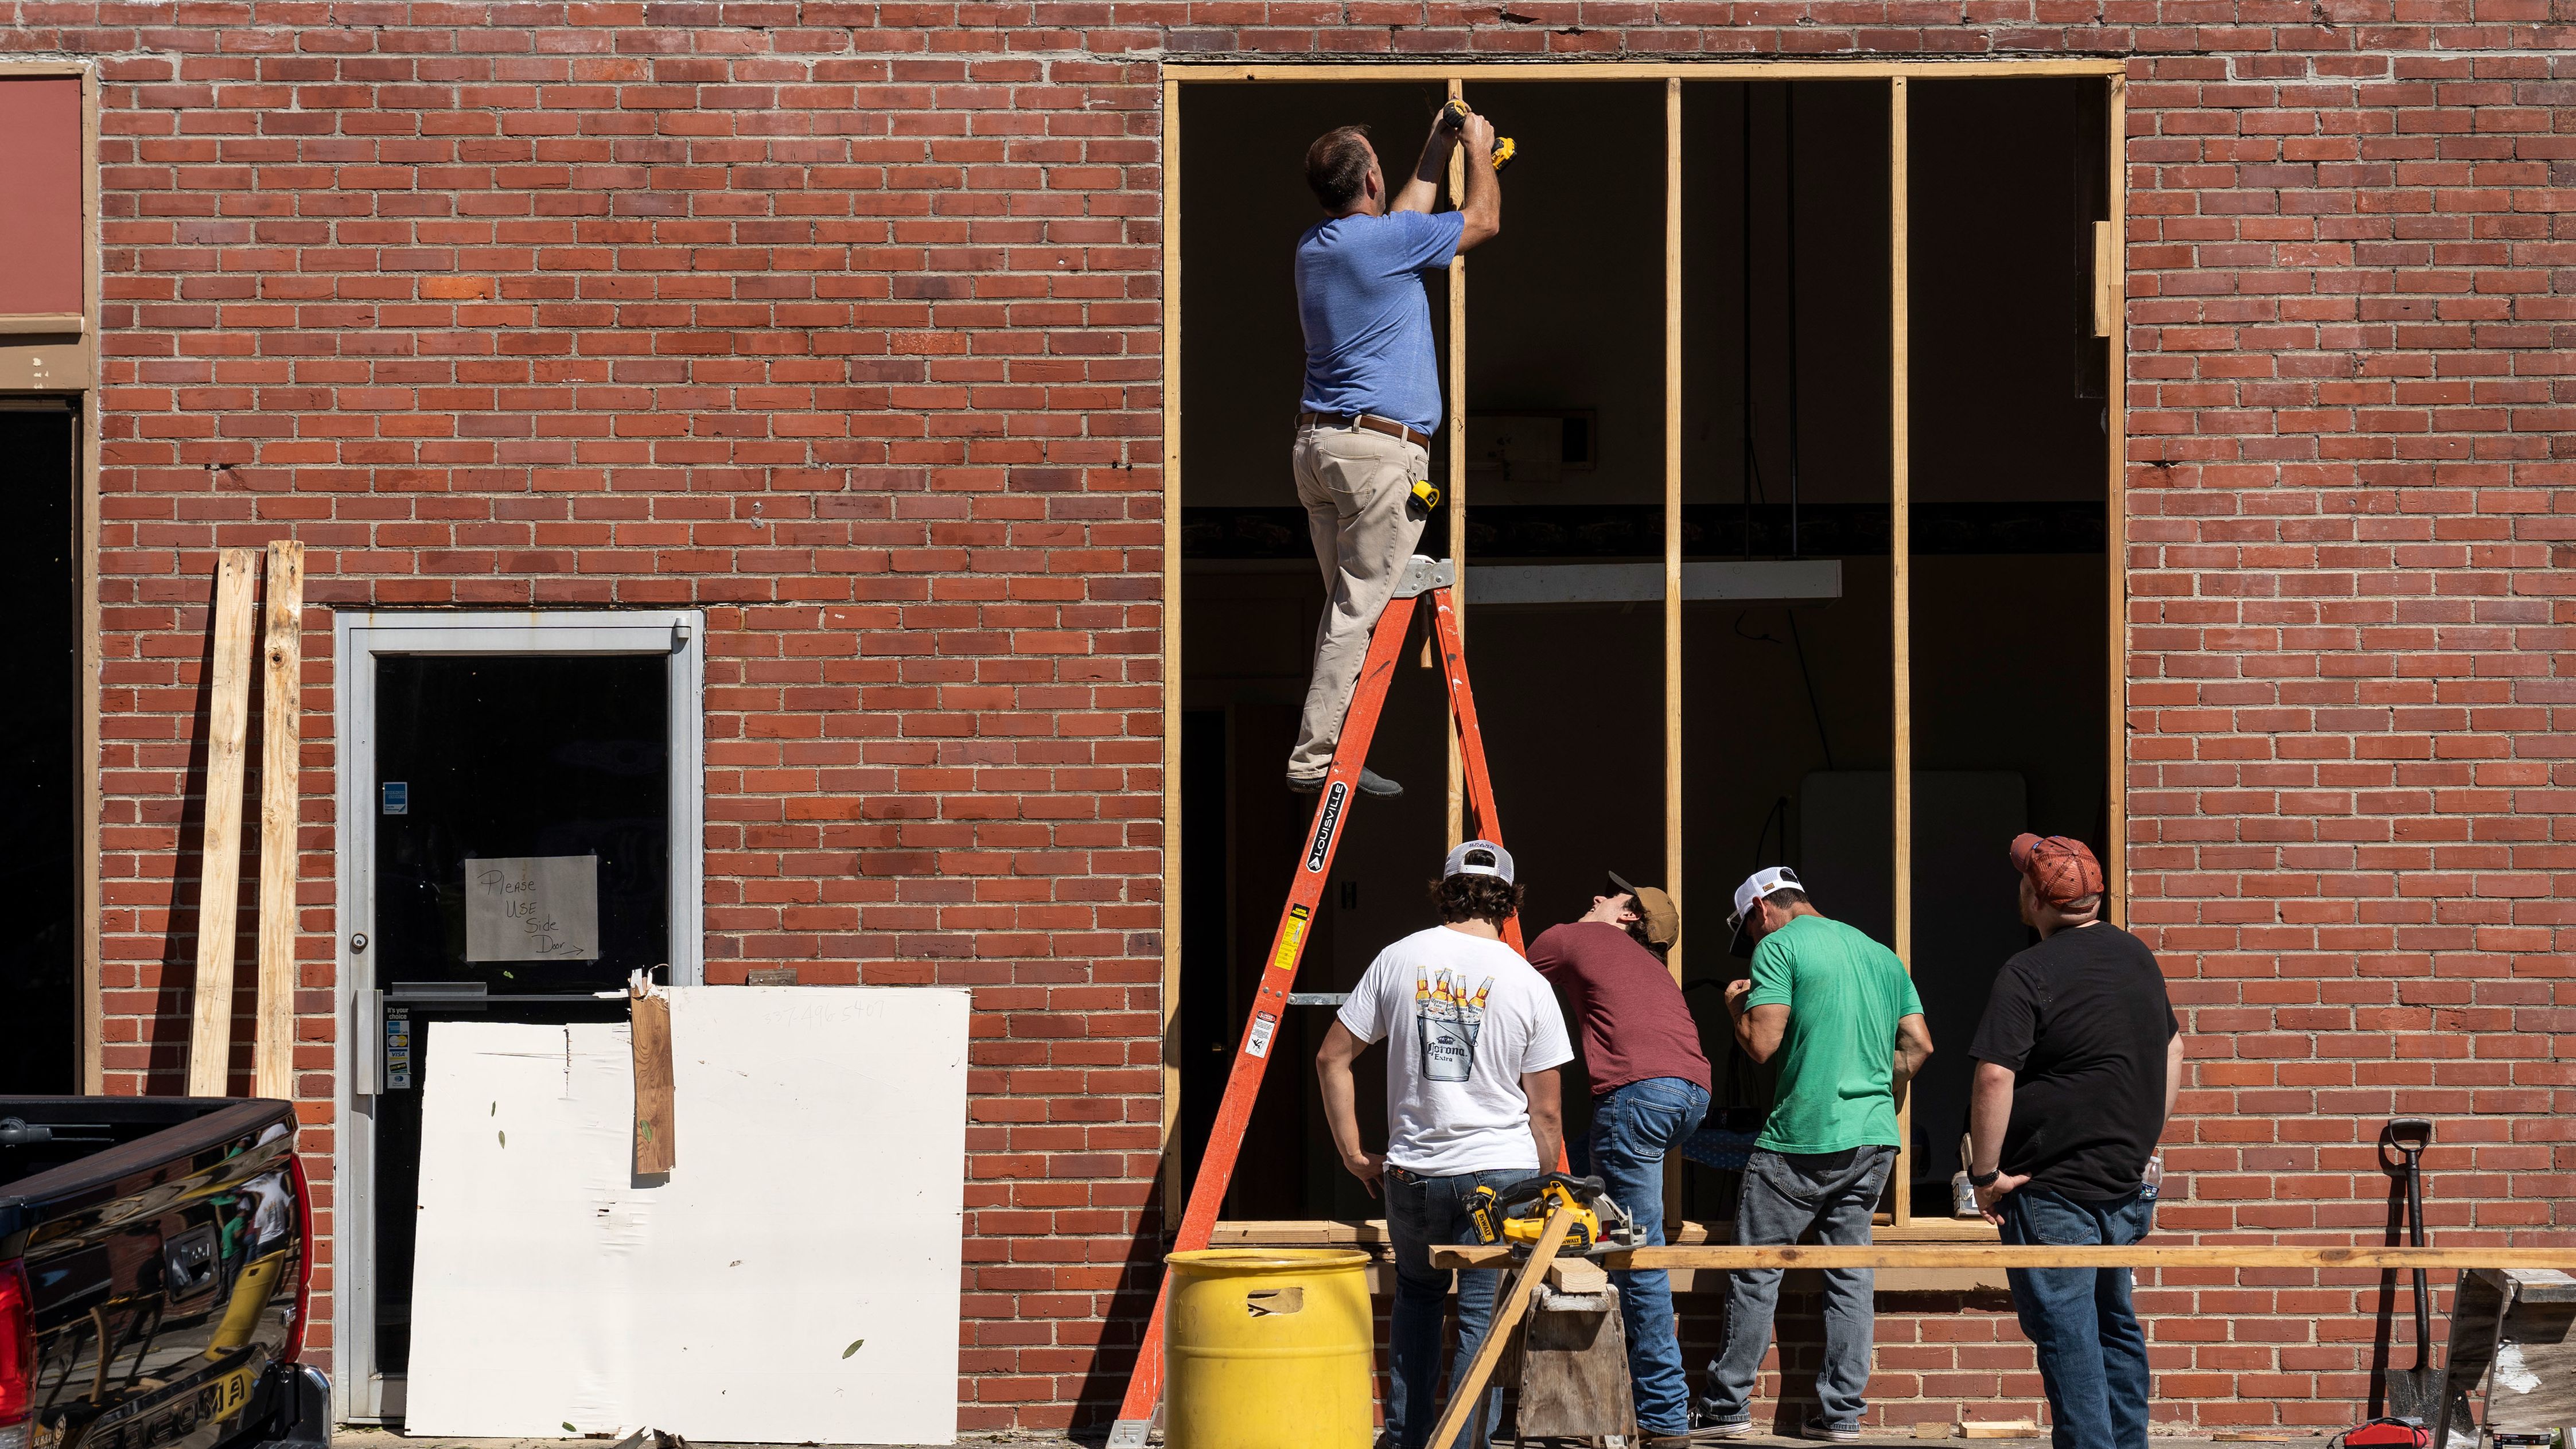 Residents of Jennings, Louisiana, were already working on October 10 to repair windows damaged by Hurricane Delta.